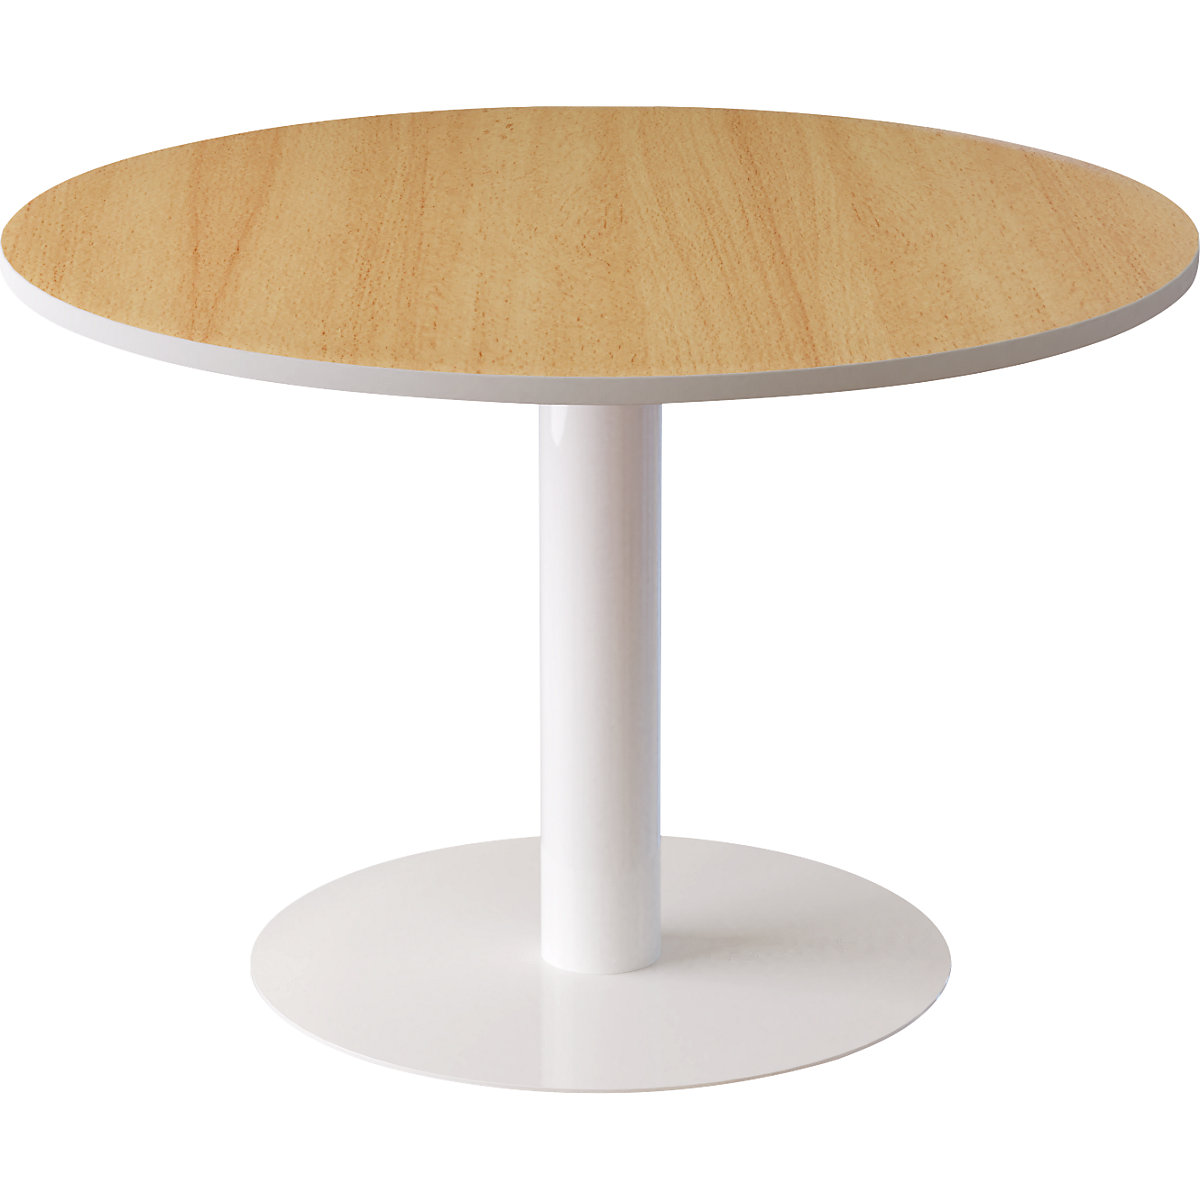 Conference table, Ø 1150 mm, 750 mm high, beech finish-4